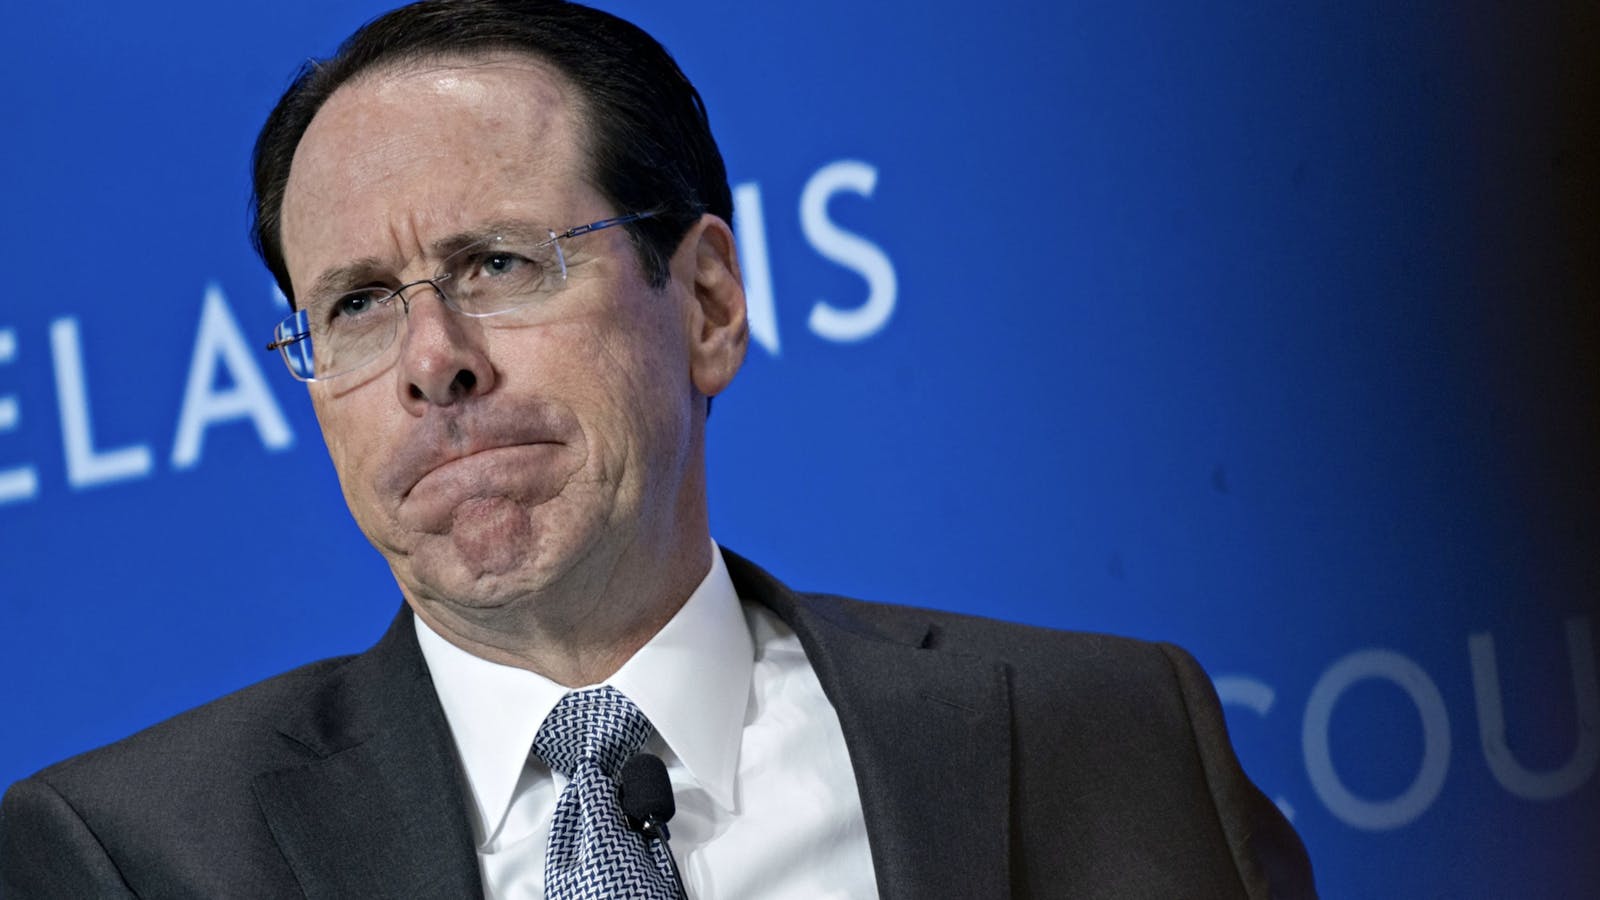 Former AT&T CEO Randall Stephenson. Photo by Bloomberg.